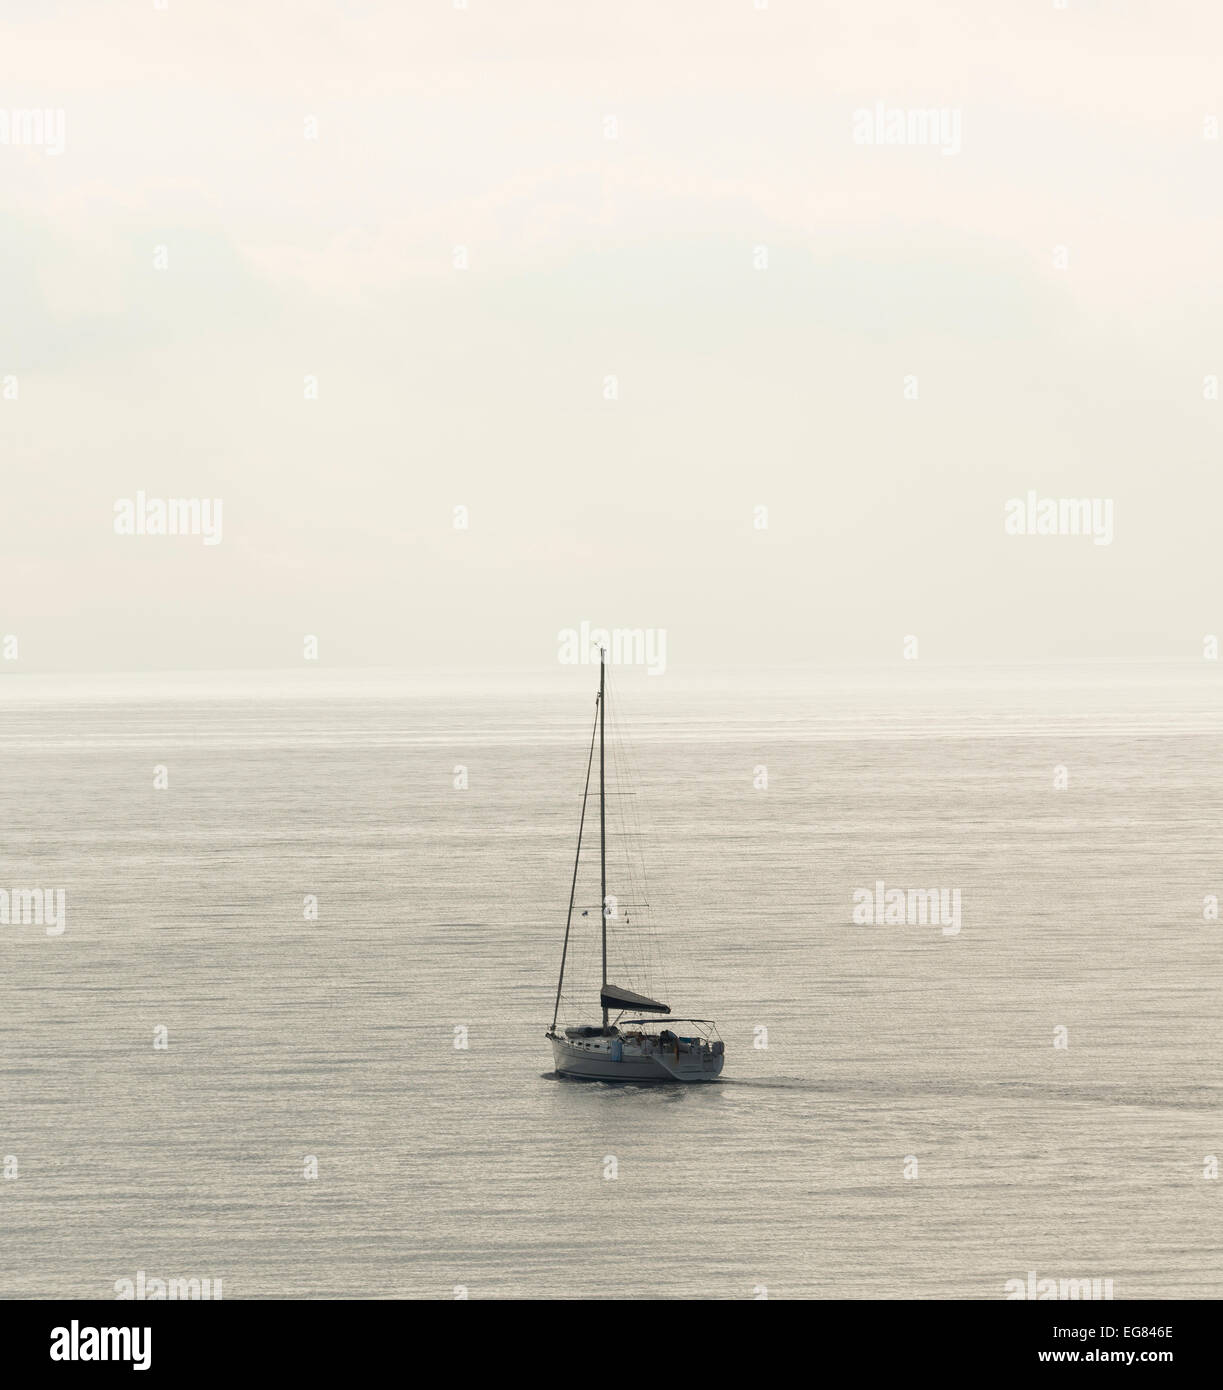 Sailing boat in the sea, France Stock Photo